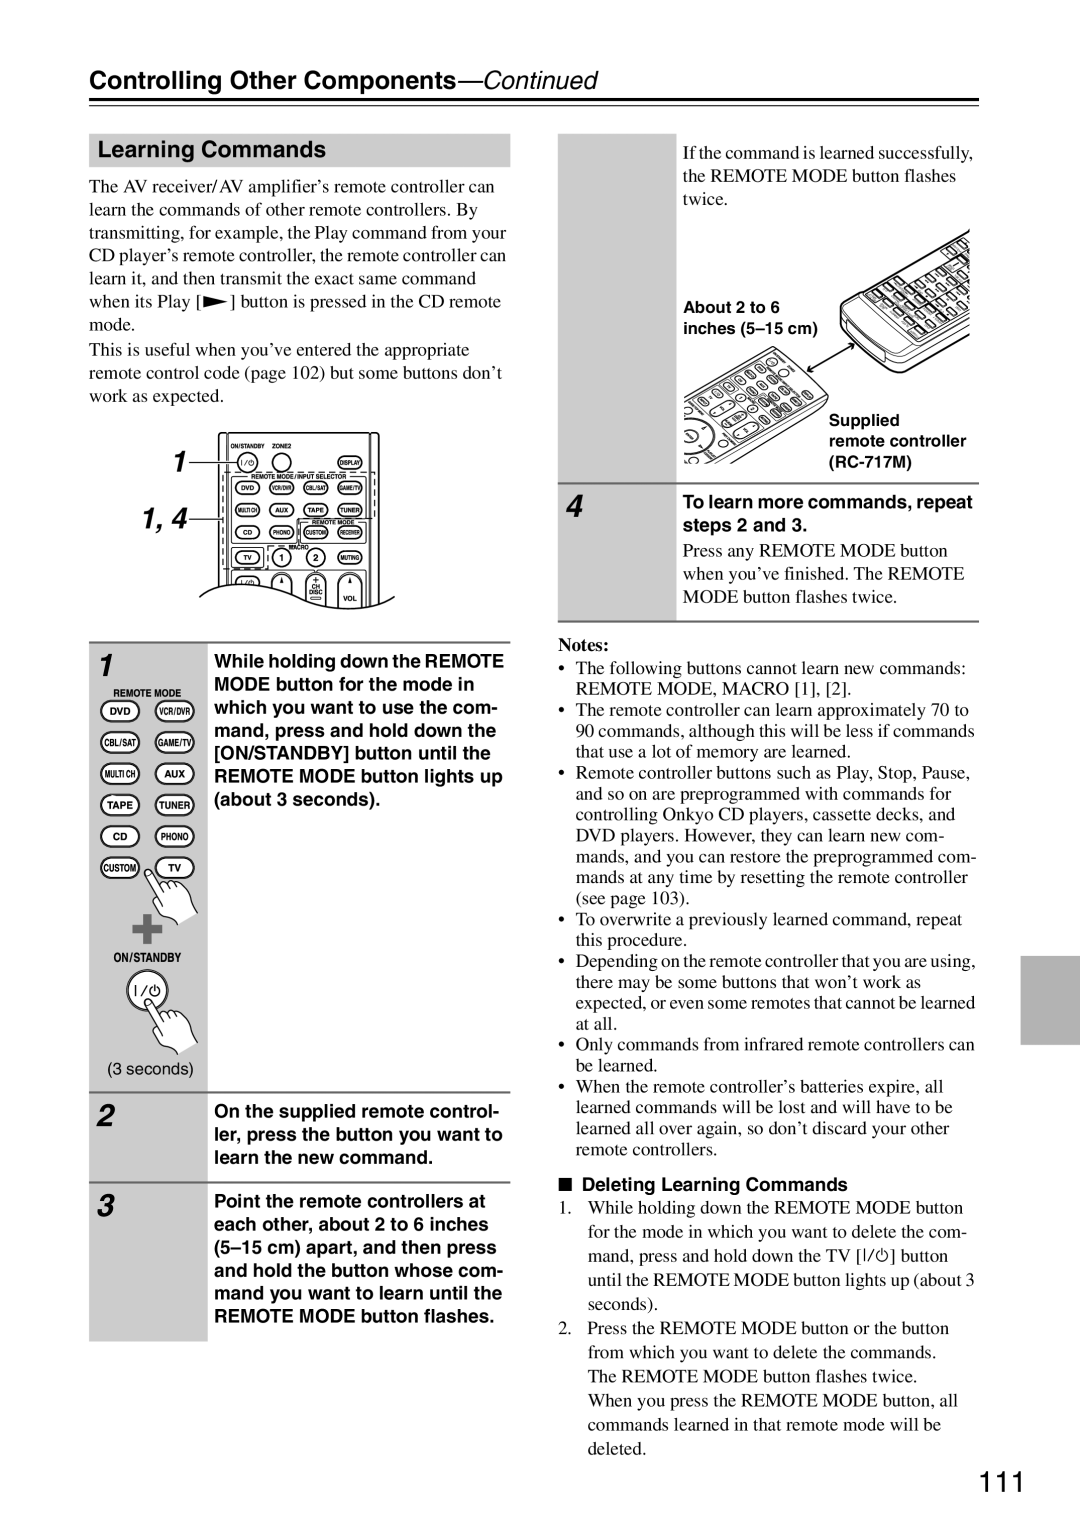 Onkyo TX-SA706 instruction manual Learning Commands, Controlling Other Components—Continued, Notes 